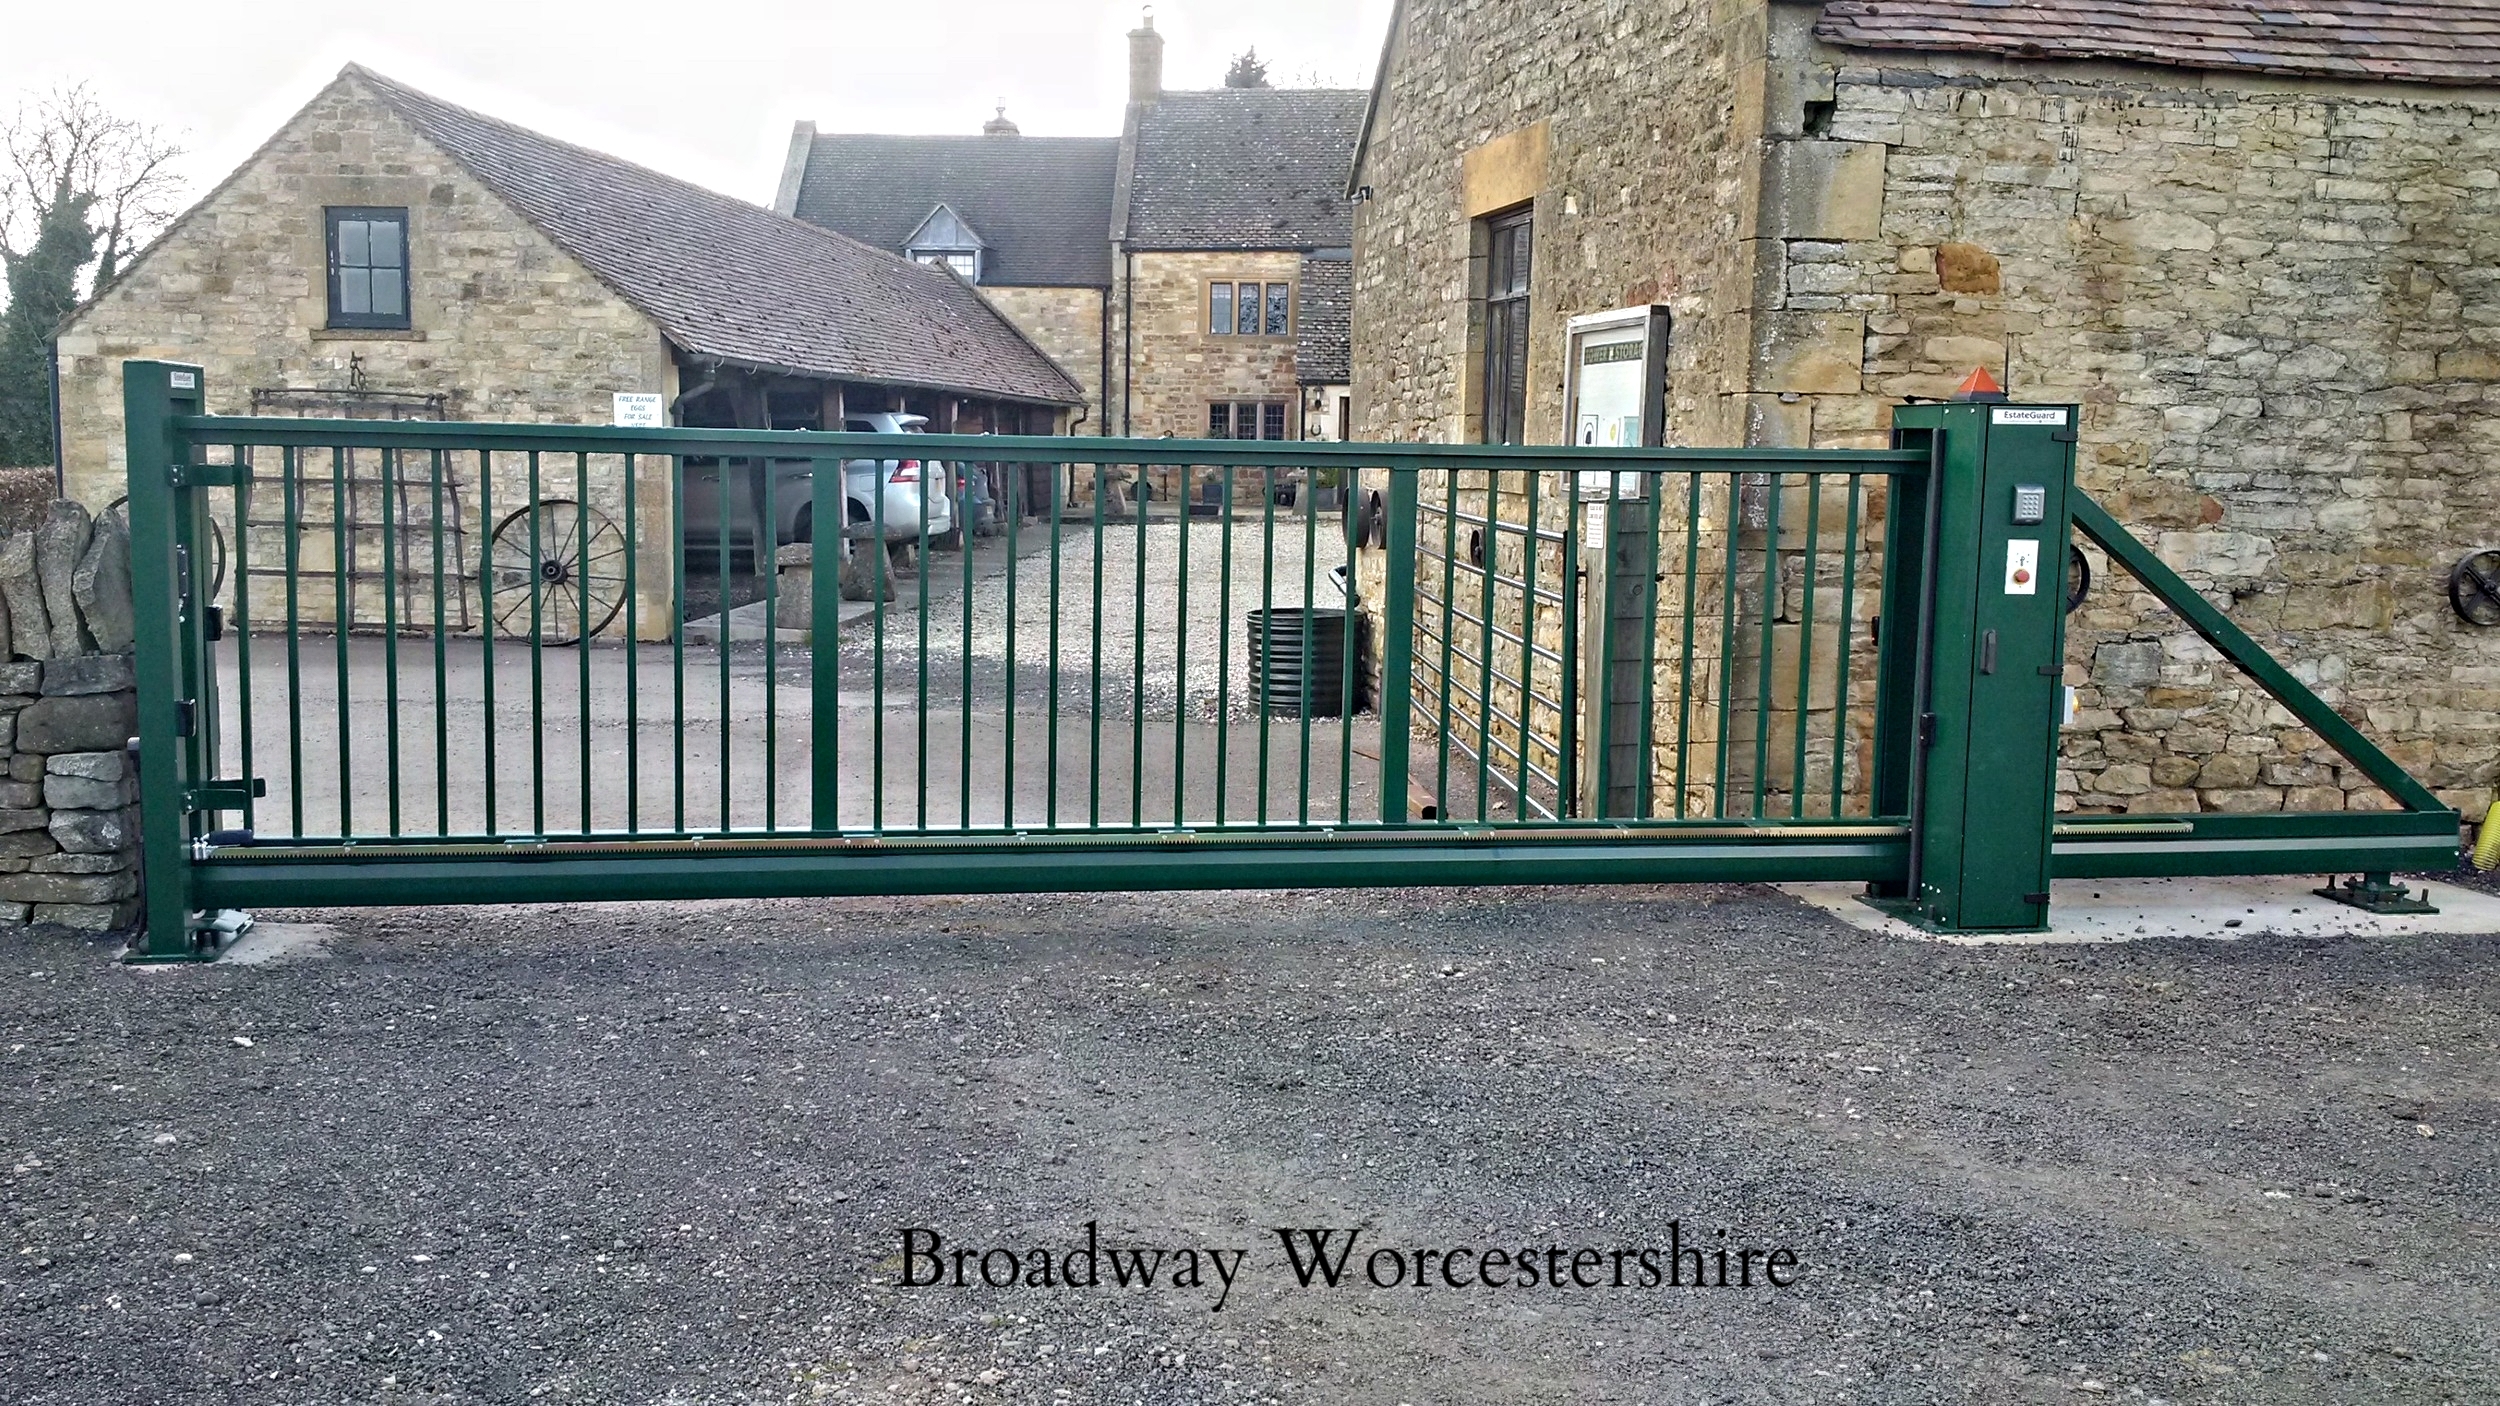 Copy of Broadway Worcestershire